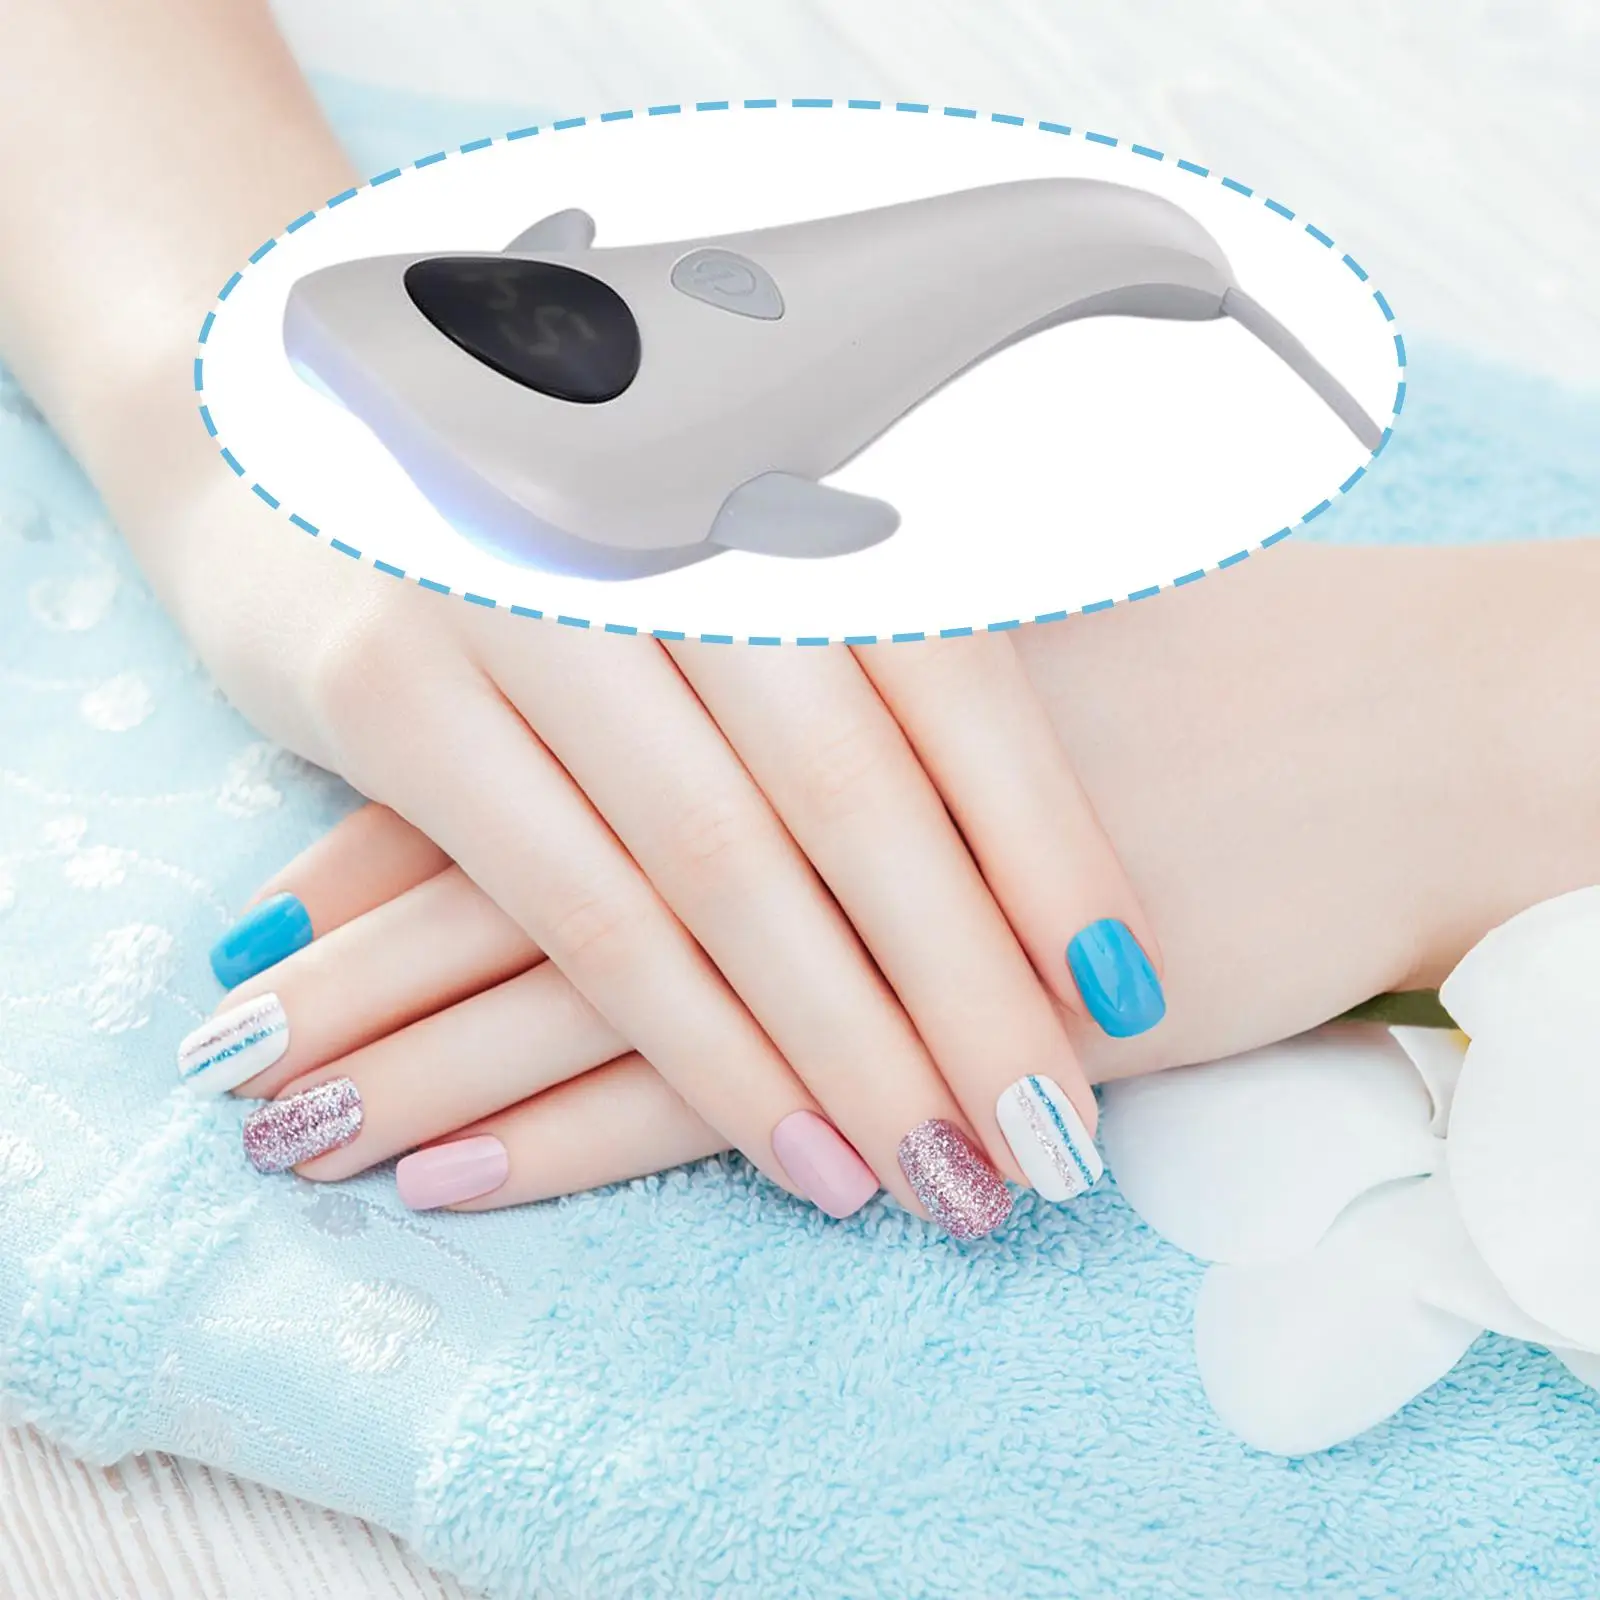 Nail Lamp Salon and Home Use Nail Polish Curing with 60S 90S 2 timers Manicure Digital Display Quick Drying Use C Gel Nail Light